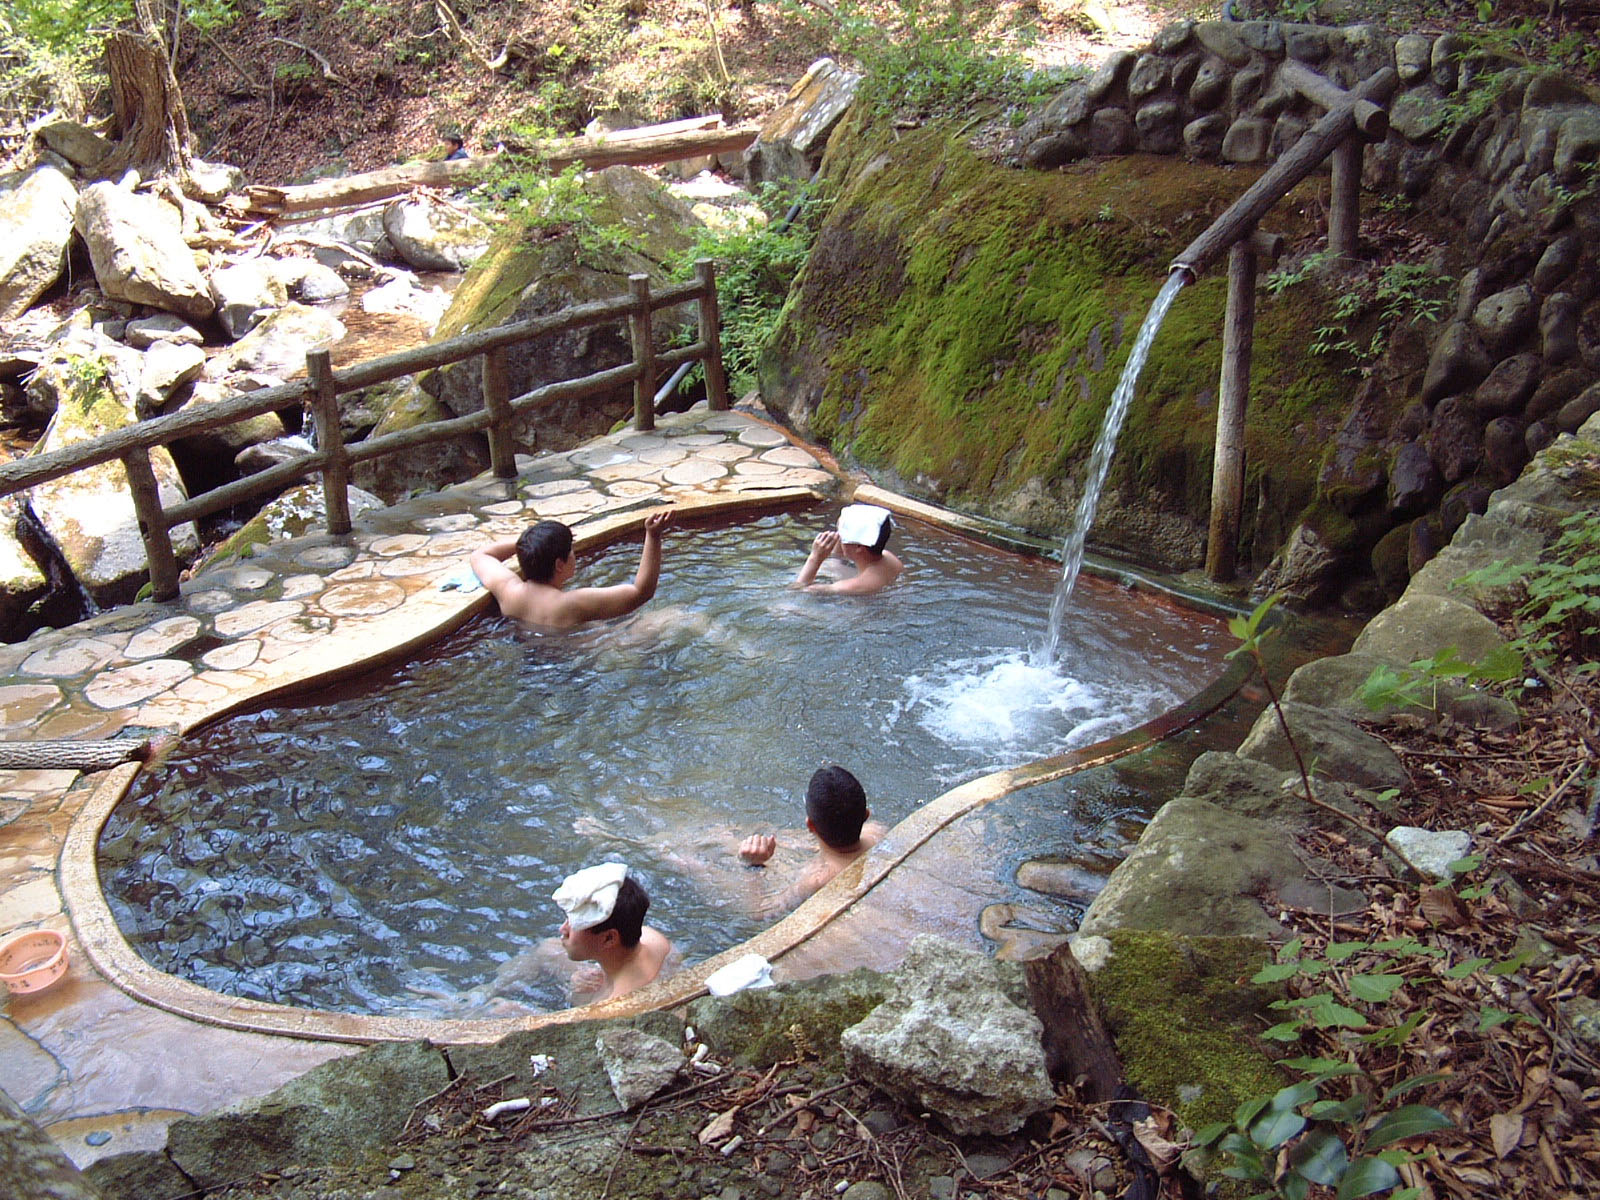 8 Important Things You Need To Know Before Going To A Japanese Onsen Bath